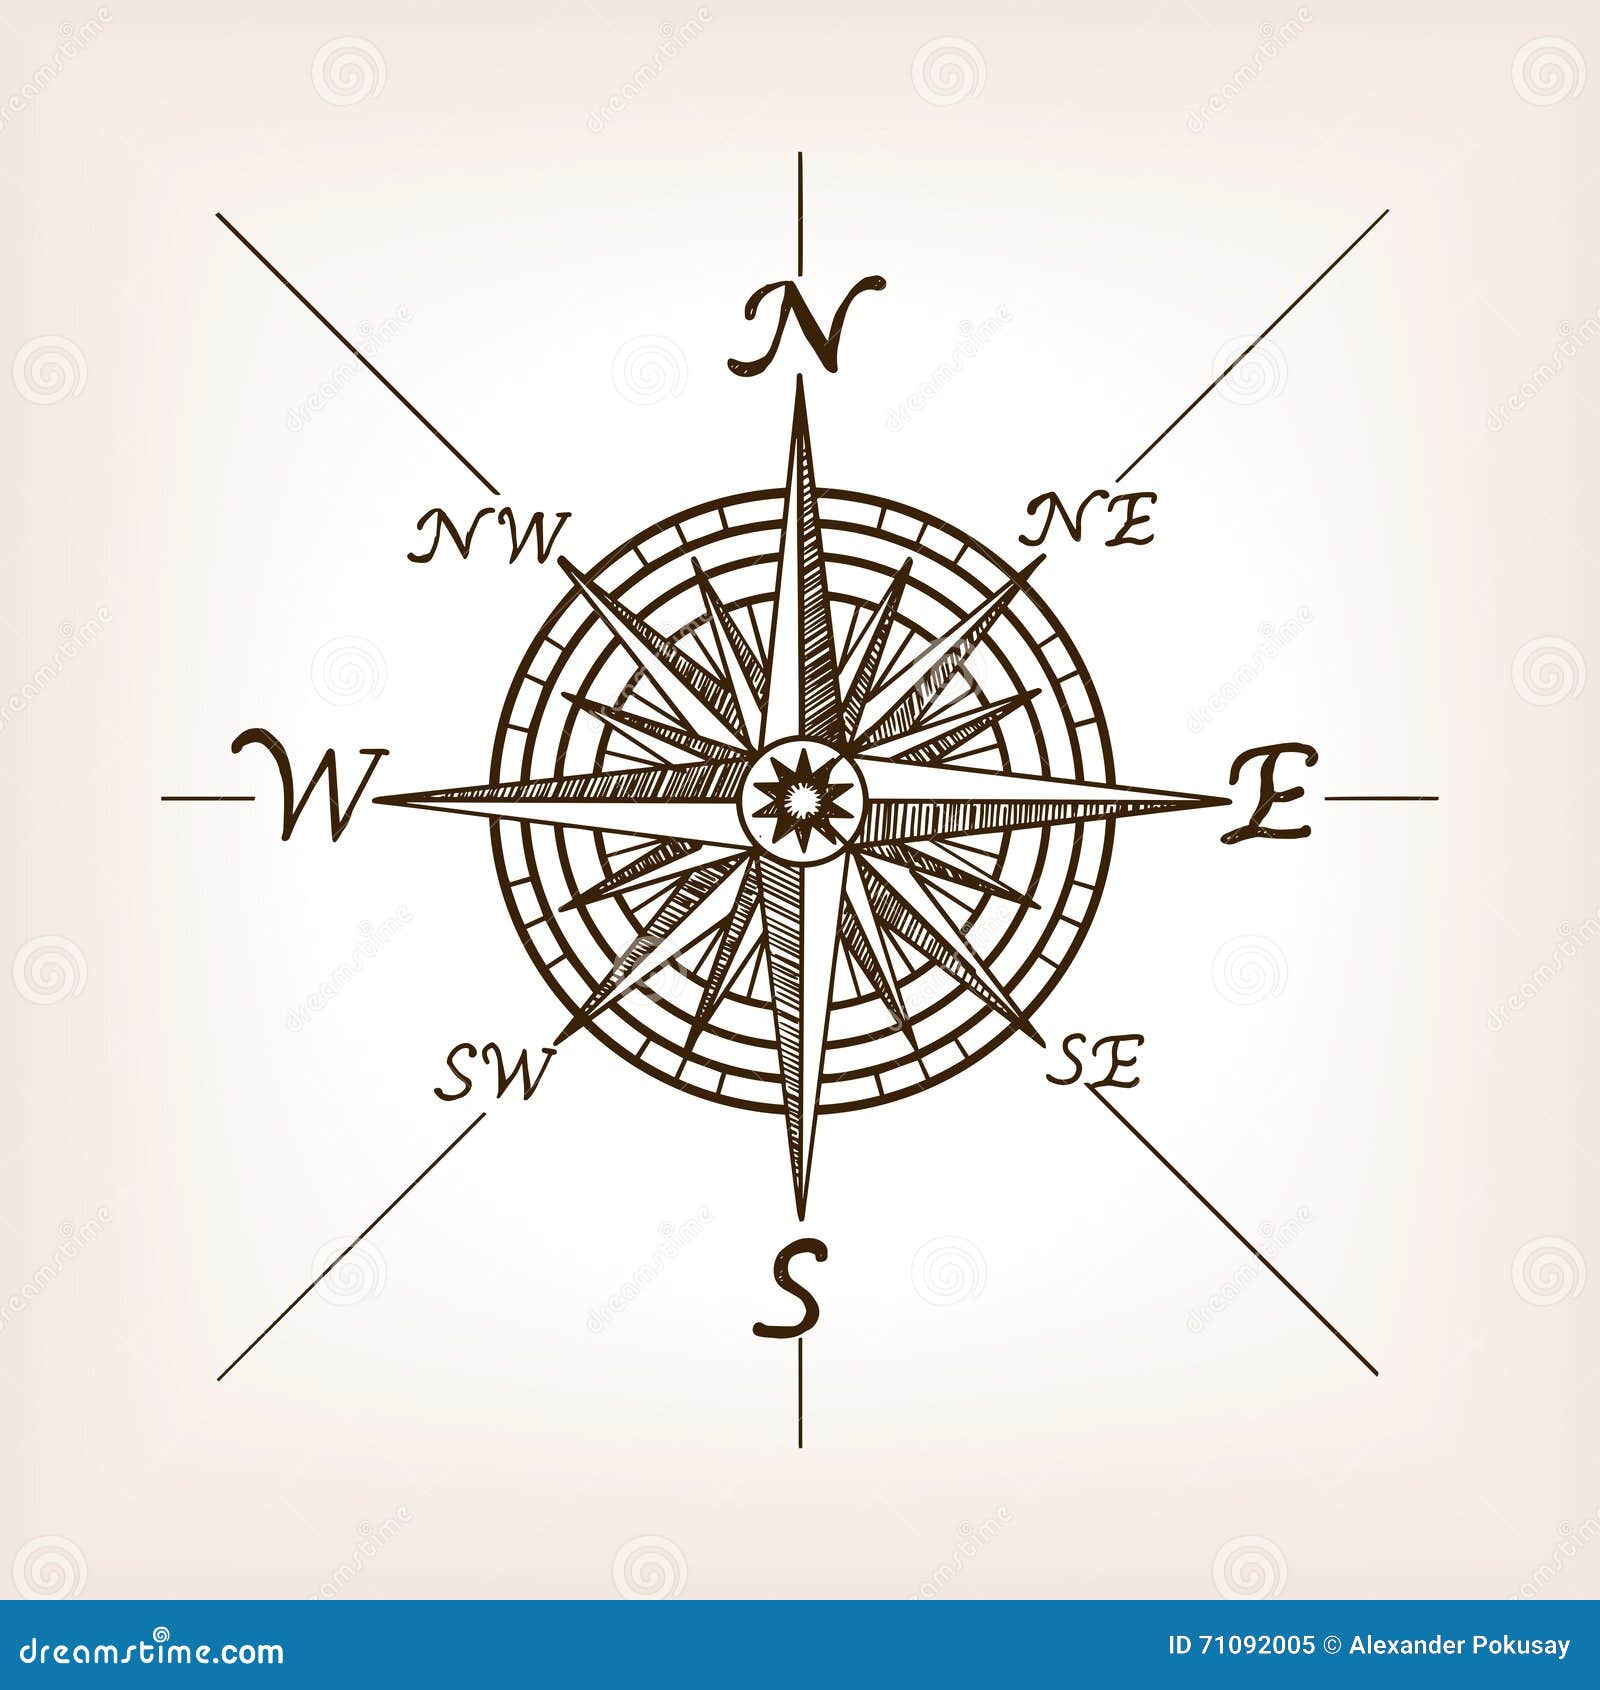 Compass Drawing  How To Draw A Compass Step By Step